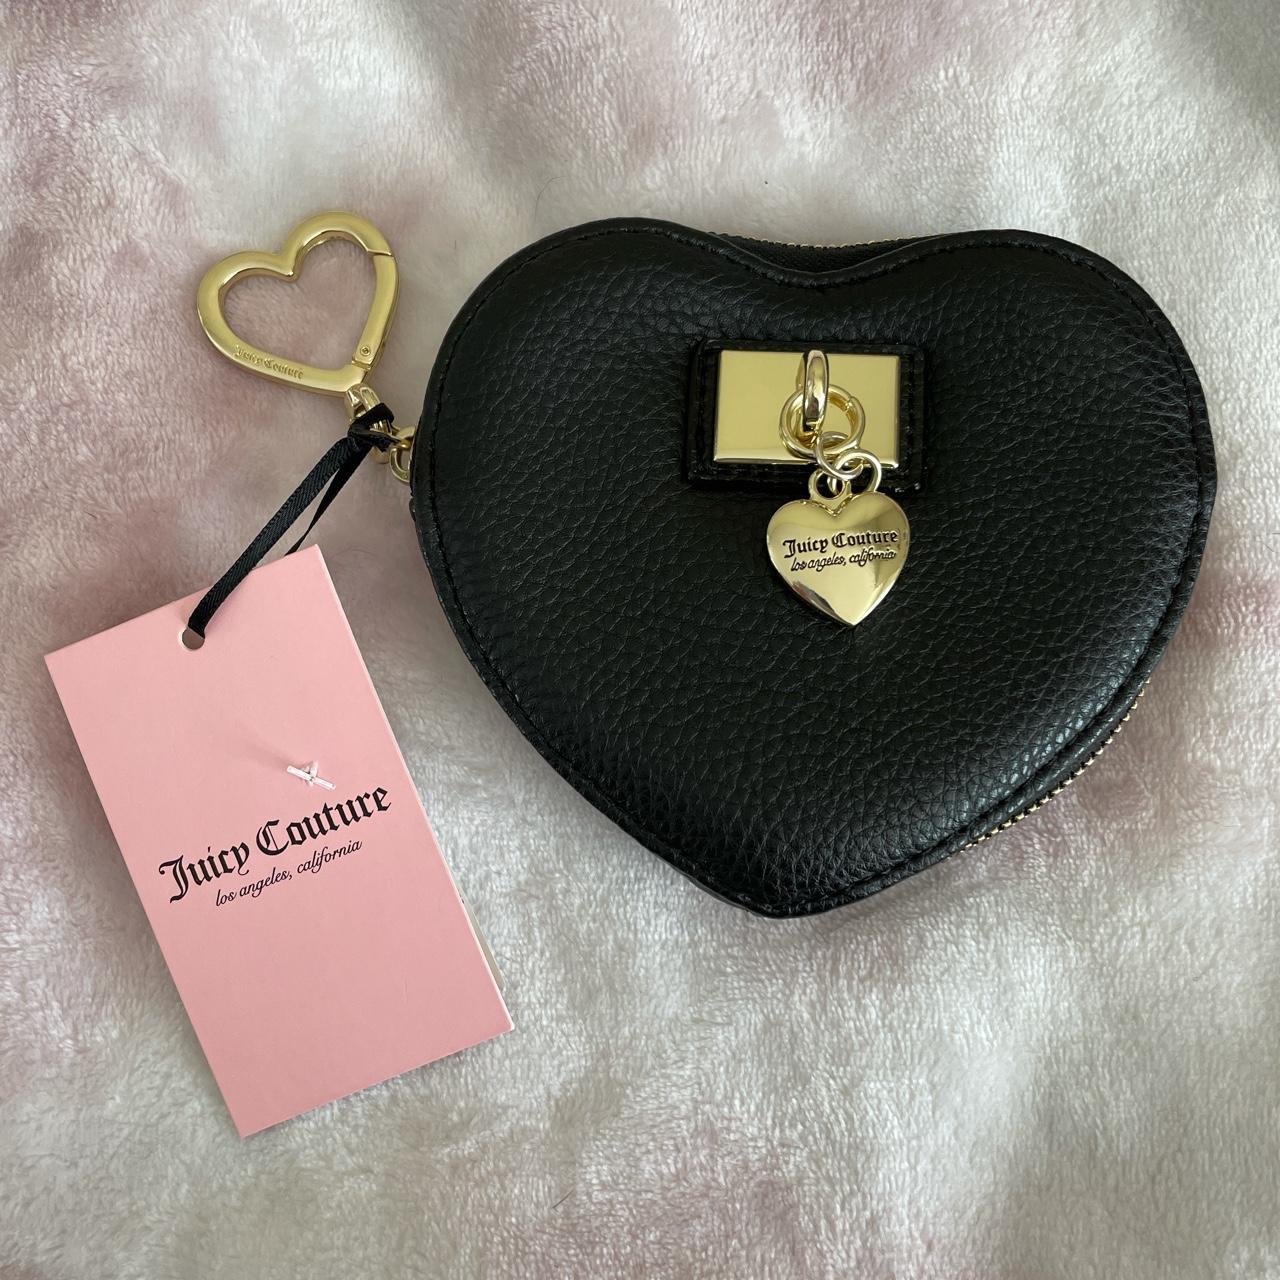 New Juicy Couture Black Coin Purse